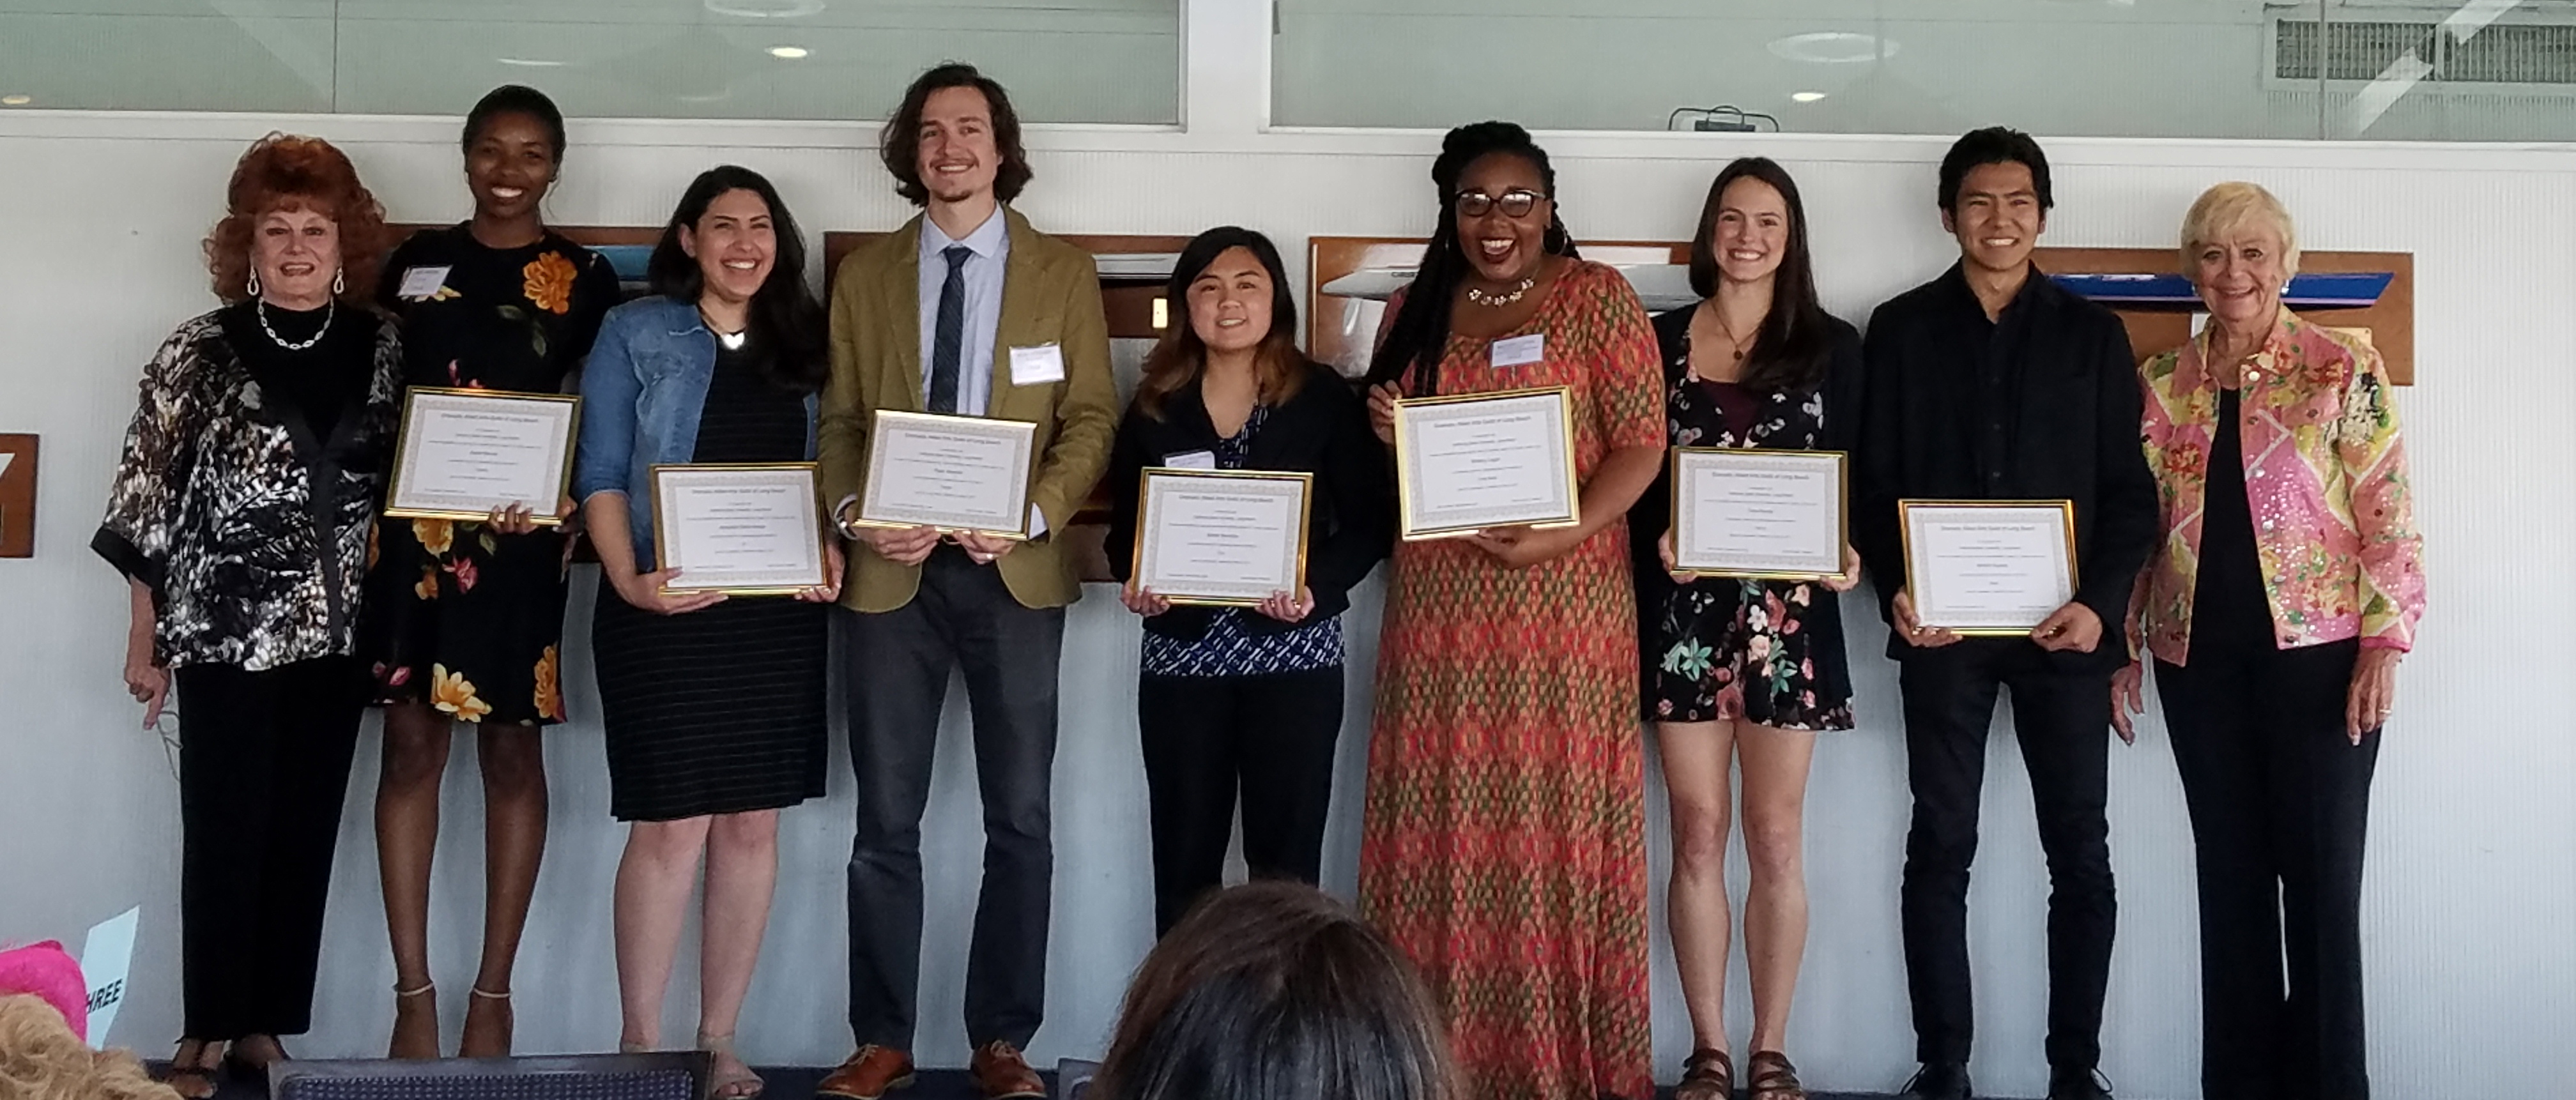  College of the Arts students get awarded scholarships.